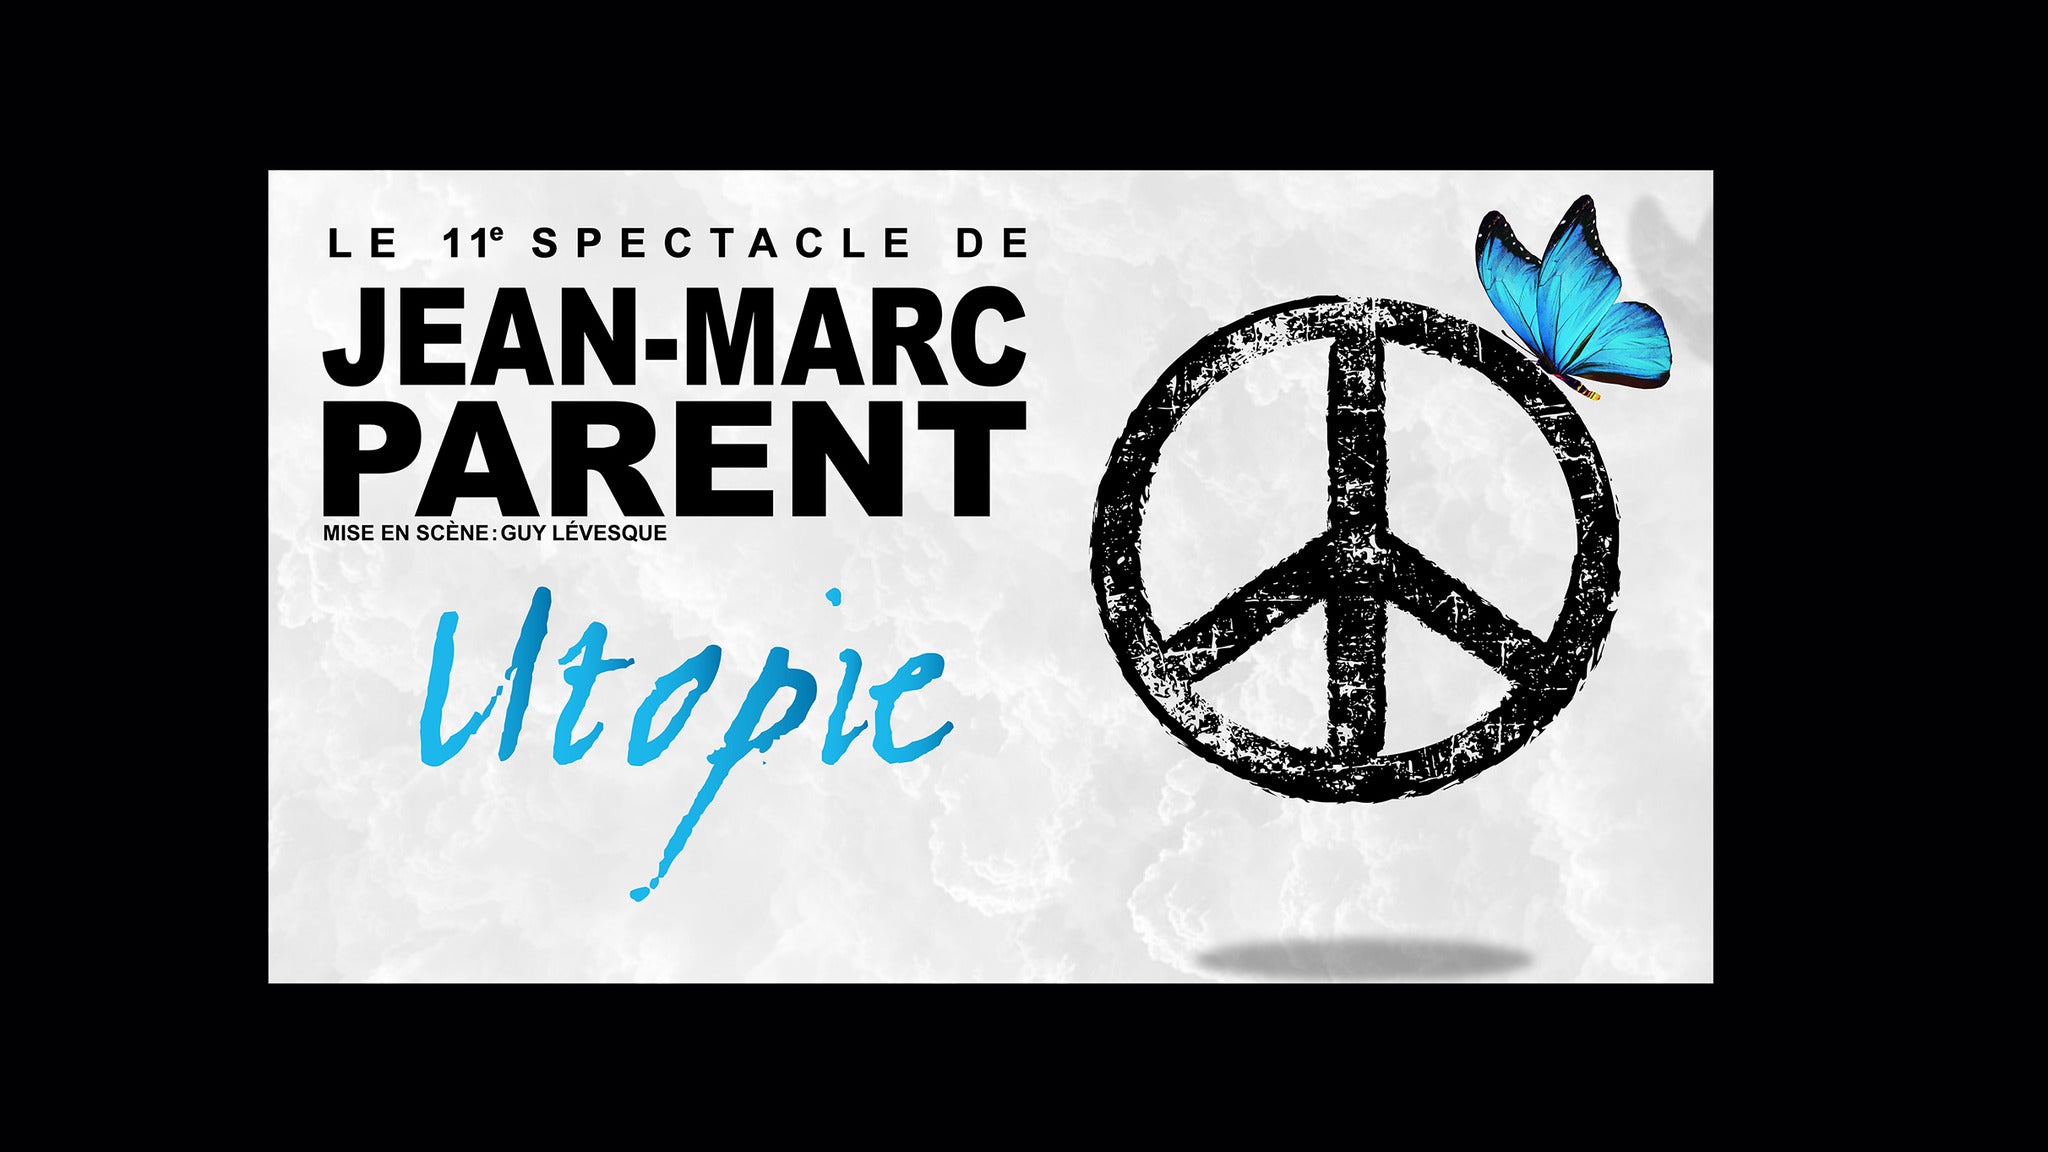 Image used with permission from Ticketmaster | Jean-Marc Parent - En attendant tickets